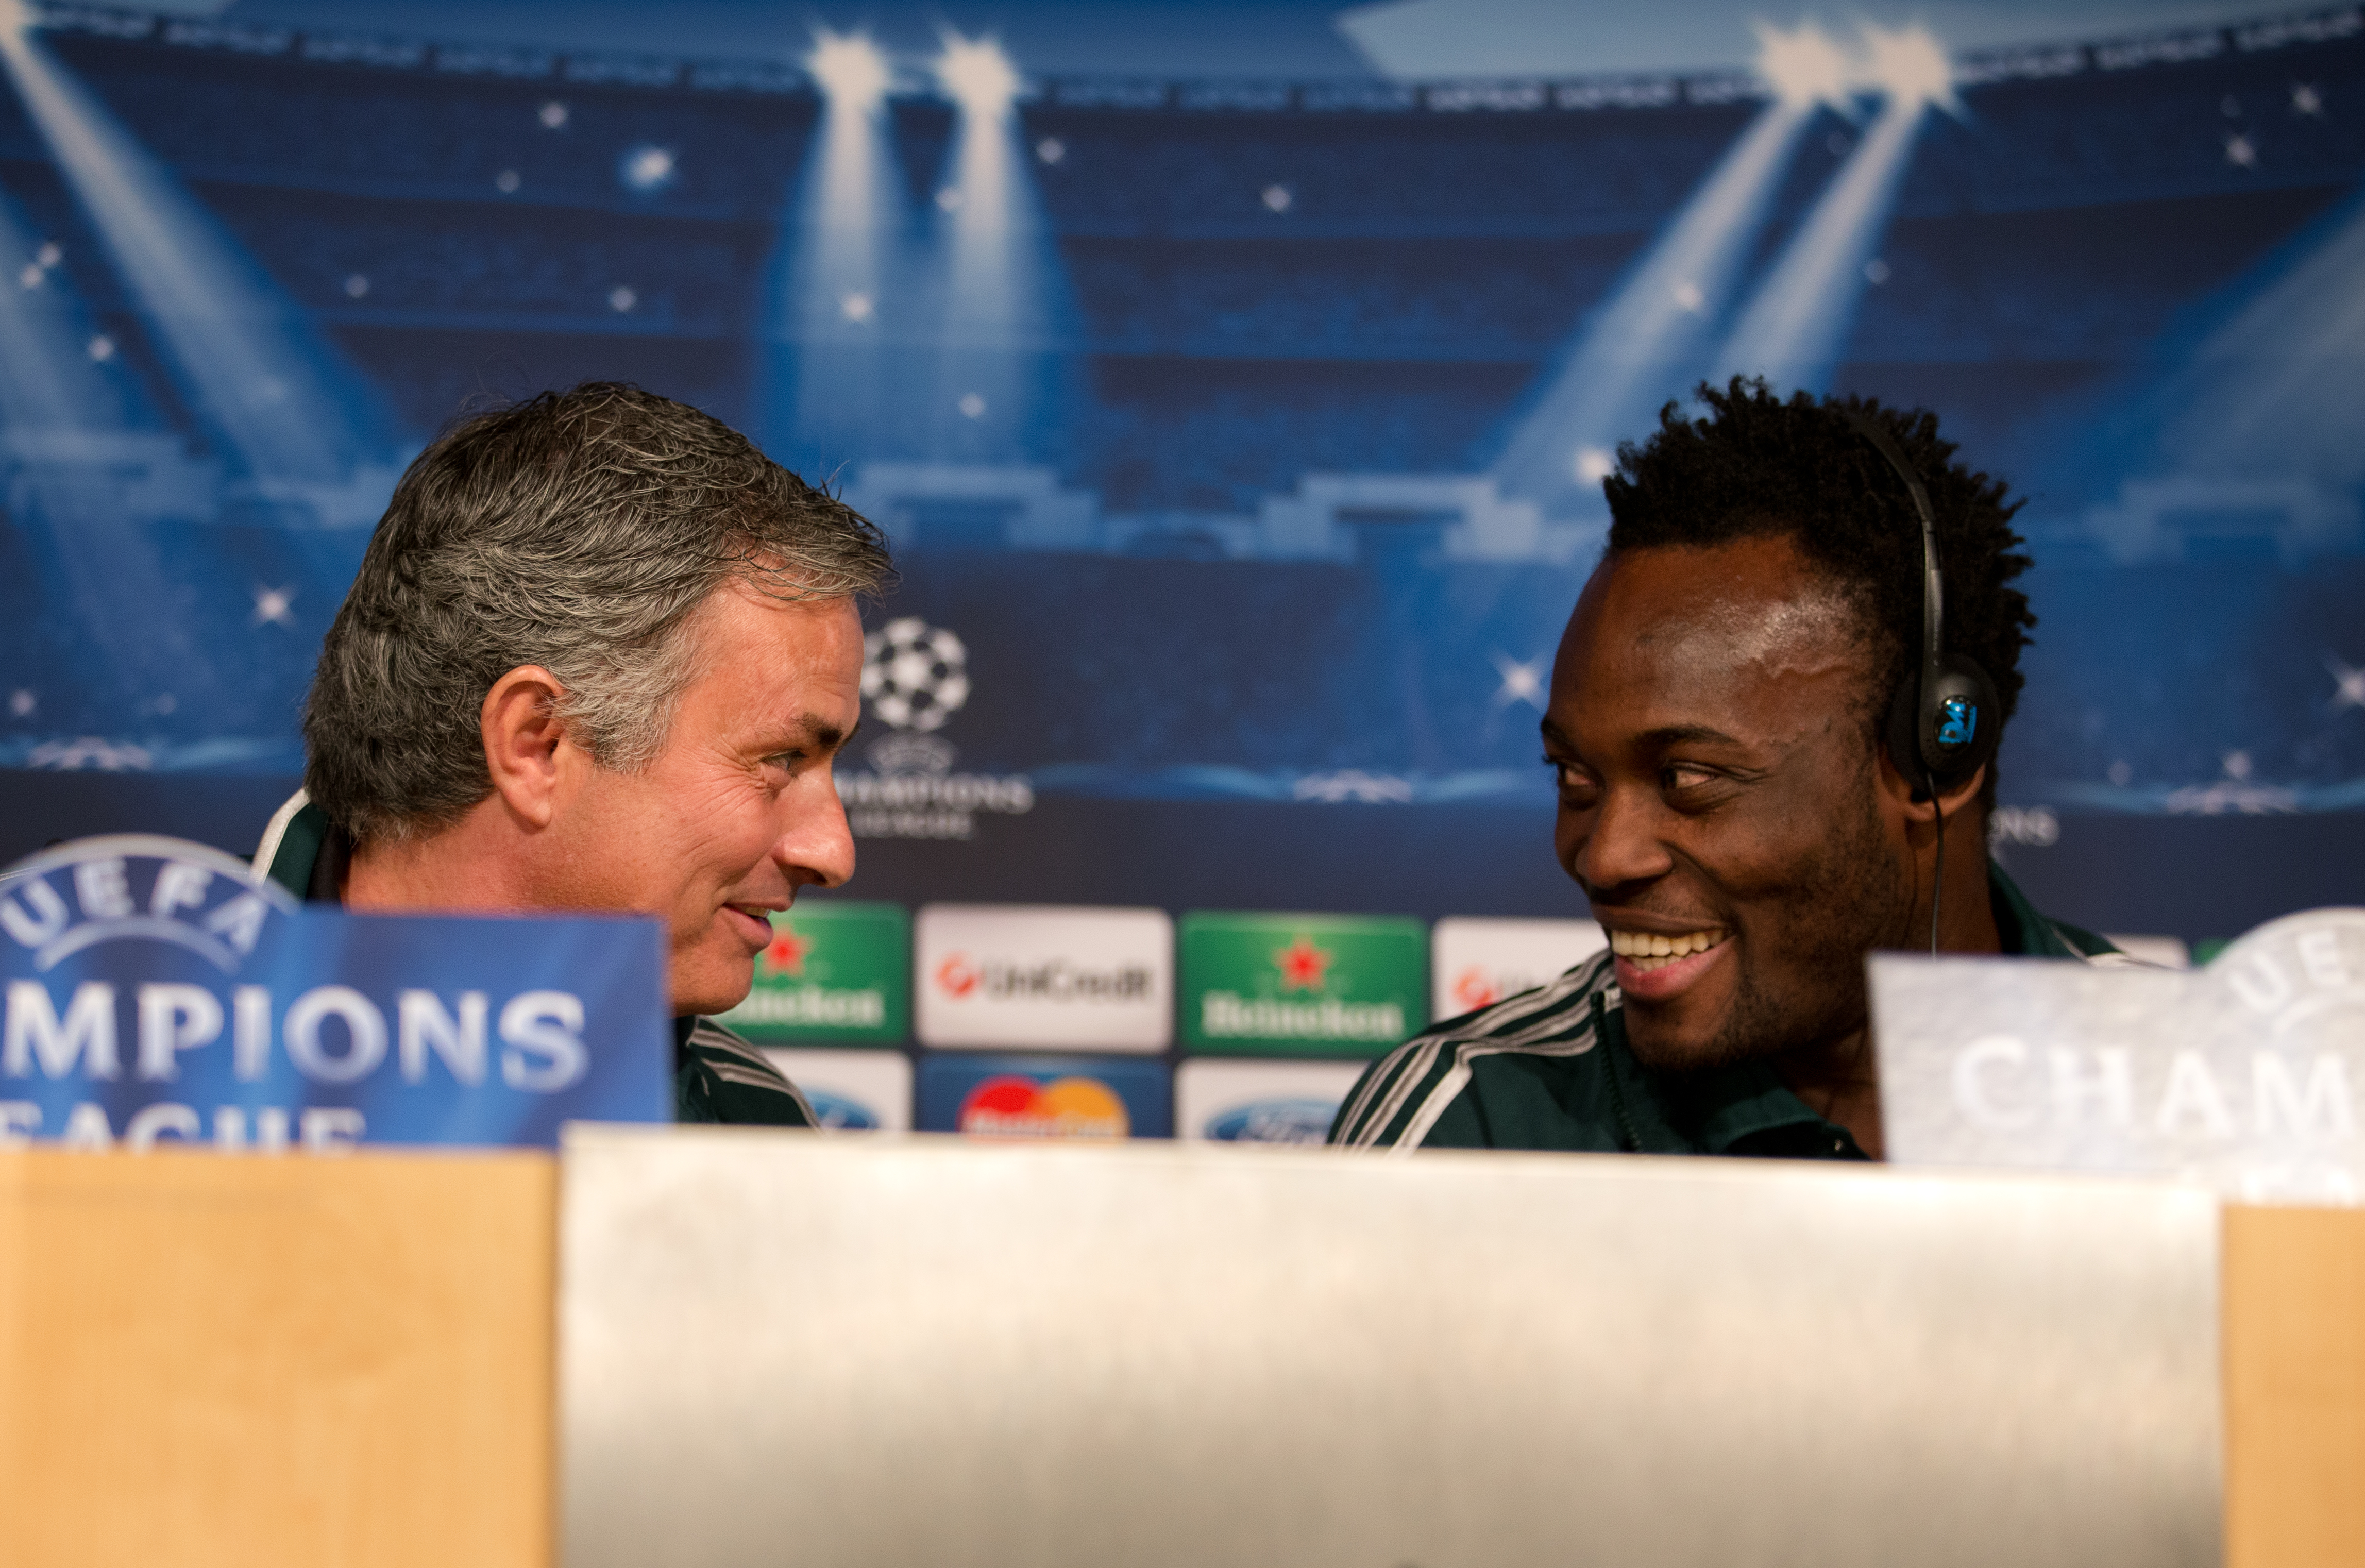 MADRID, SPAIN - FEBRUARY 12:  Head coach Jose Mourinho (L) of Real Madrid chats with his player Michael Essien during a press conference ahead of the UEFA Champions League match between Real Madrid CF and Manchester United at the Valdebebas training ground on February 12, 2013 in Madrid, Spain.  (Photo by Jasper Juinen/Getty Images)